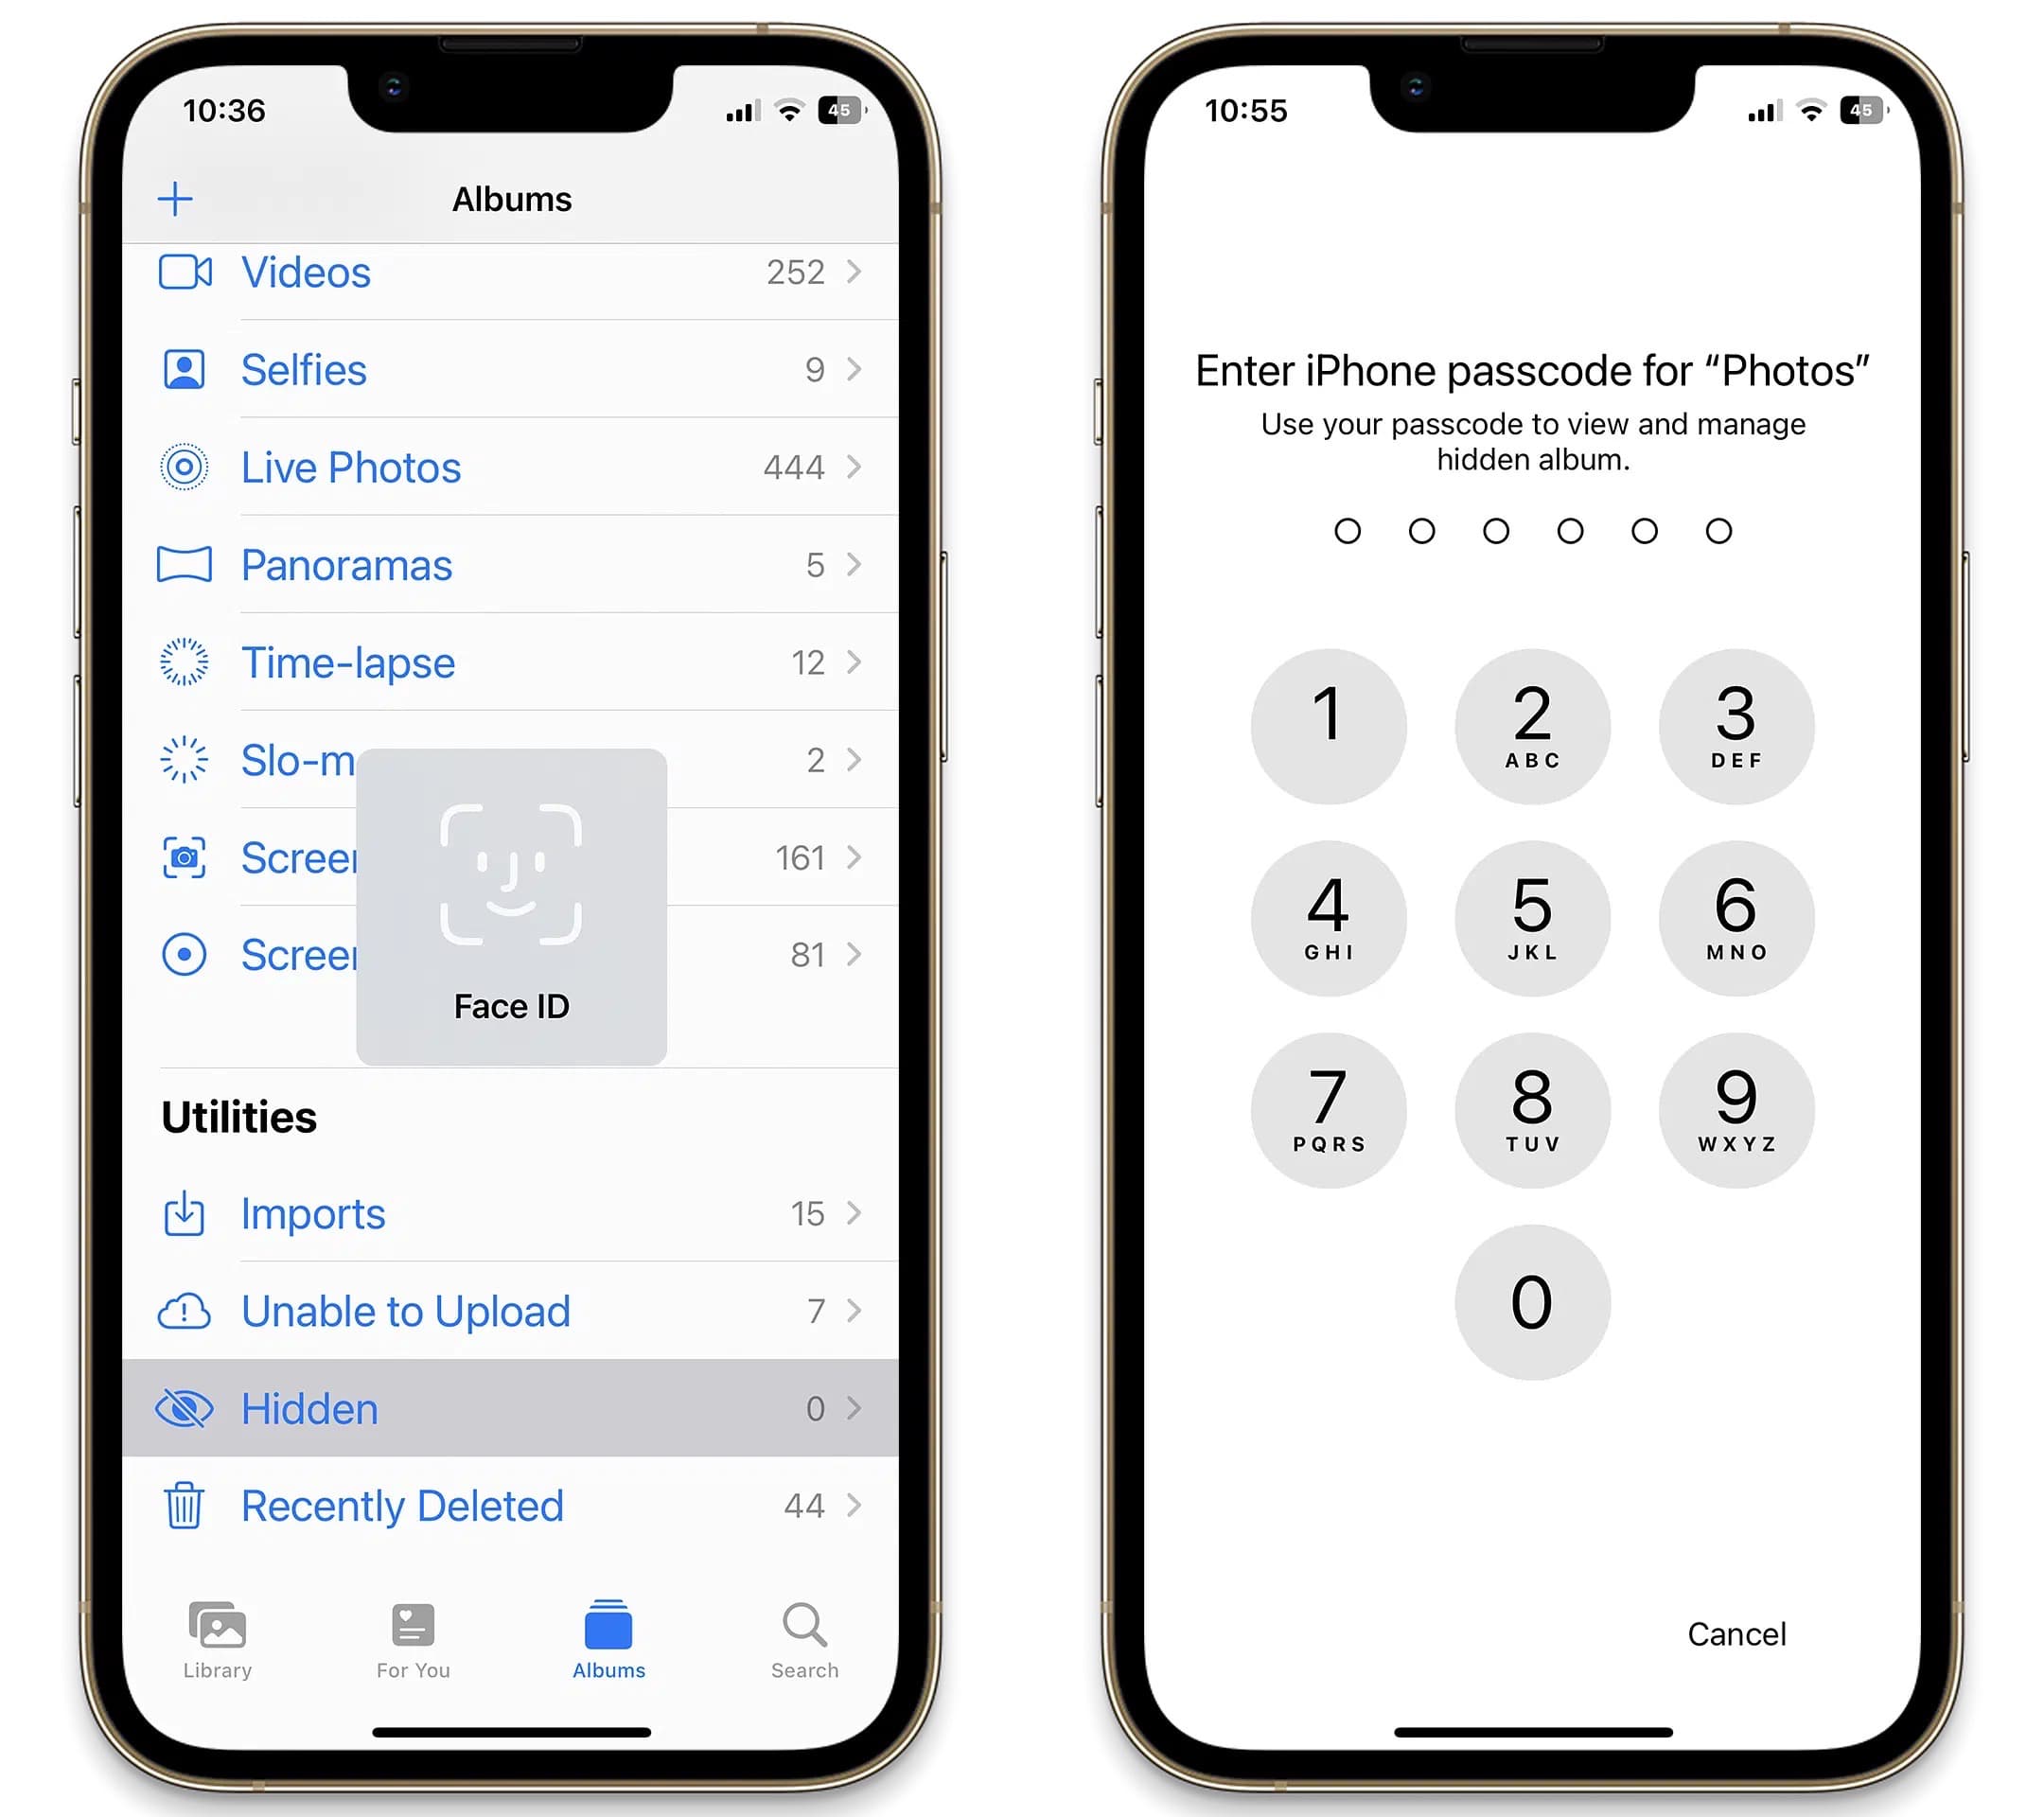 Anouk requires biometric or passcode authentication to access the Hidden album on pwned iOS 15 devices